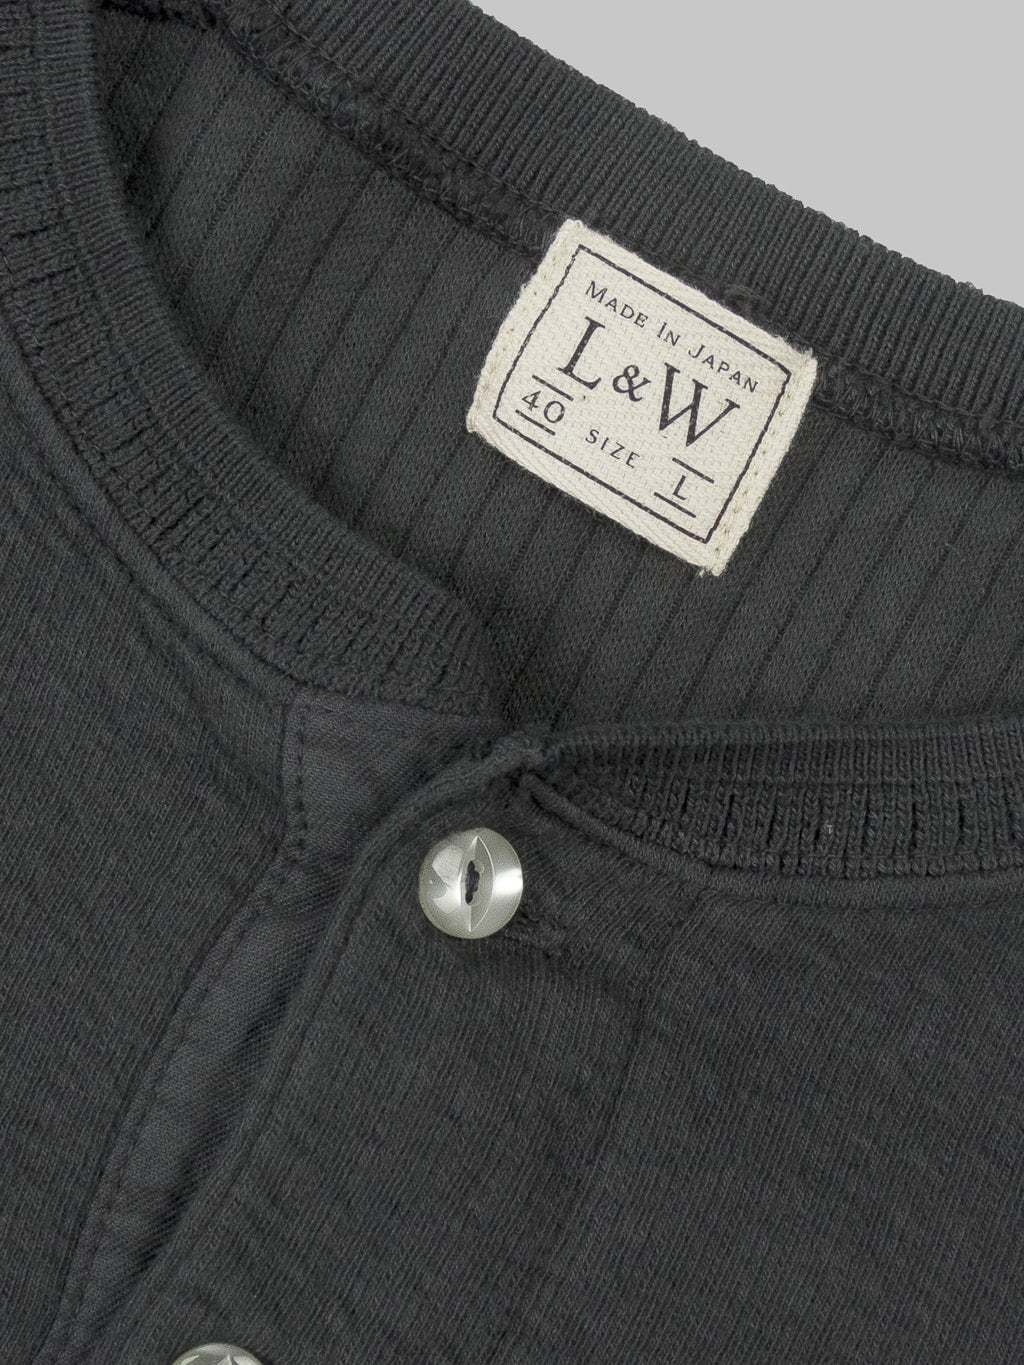 Loop Weft Double Face Jacquard henley Thermal antique black interior tag